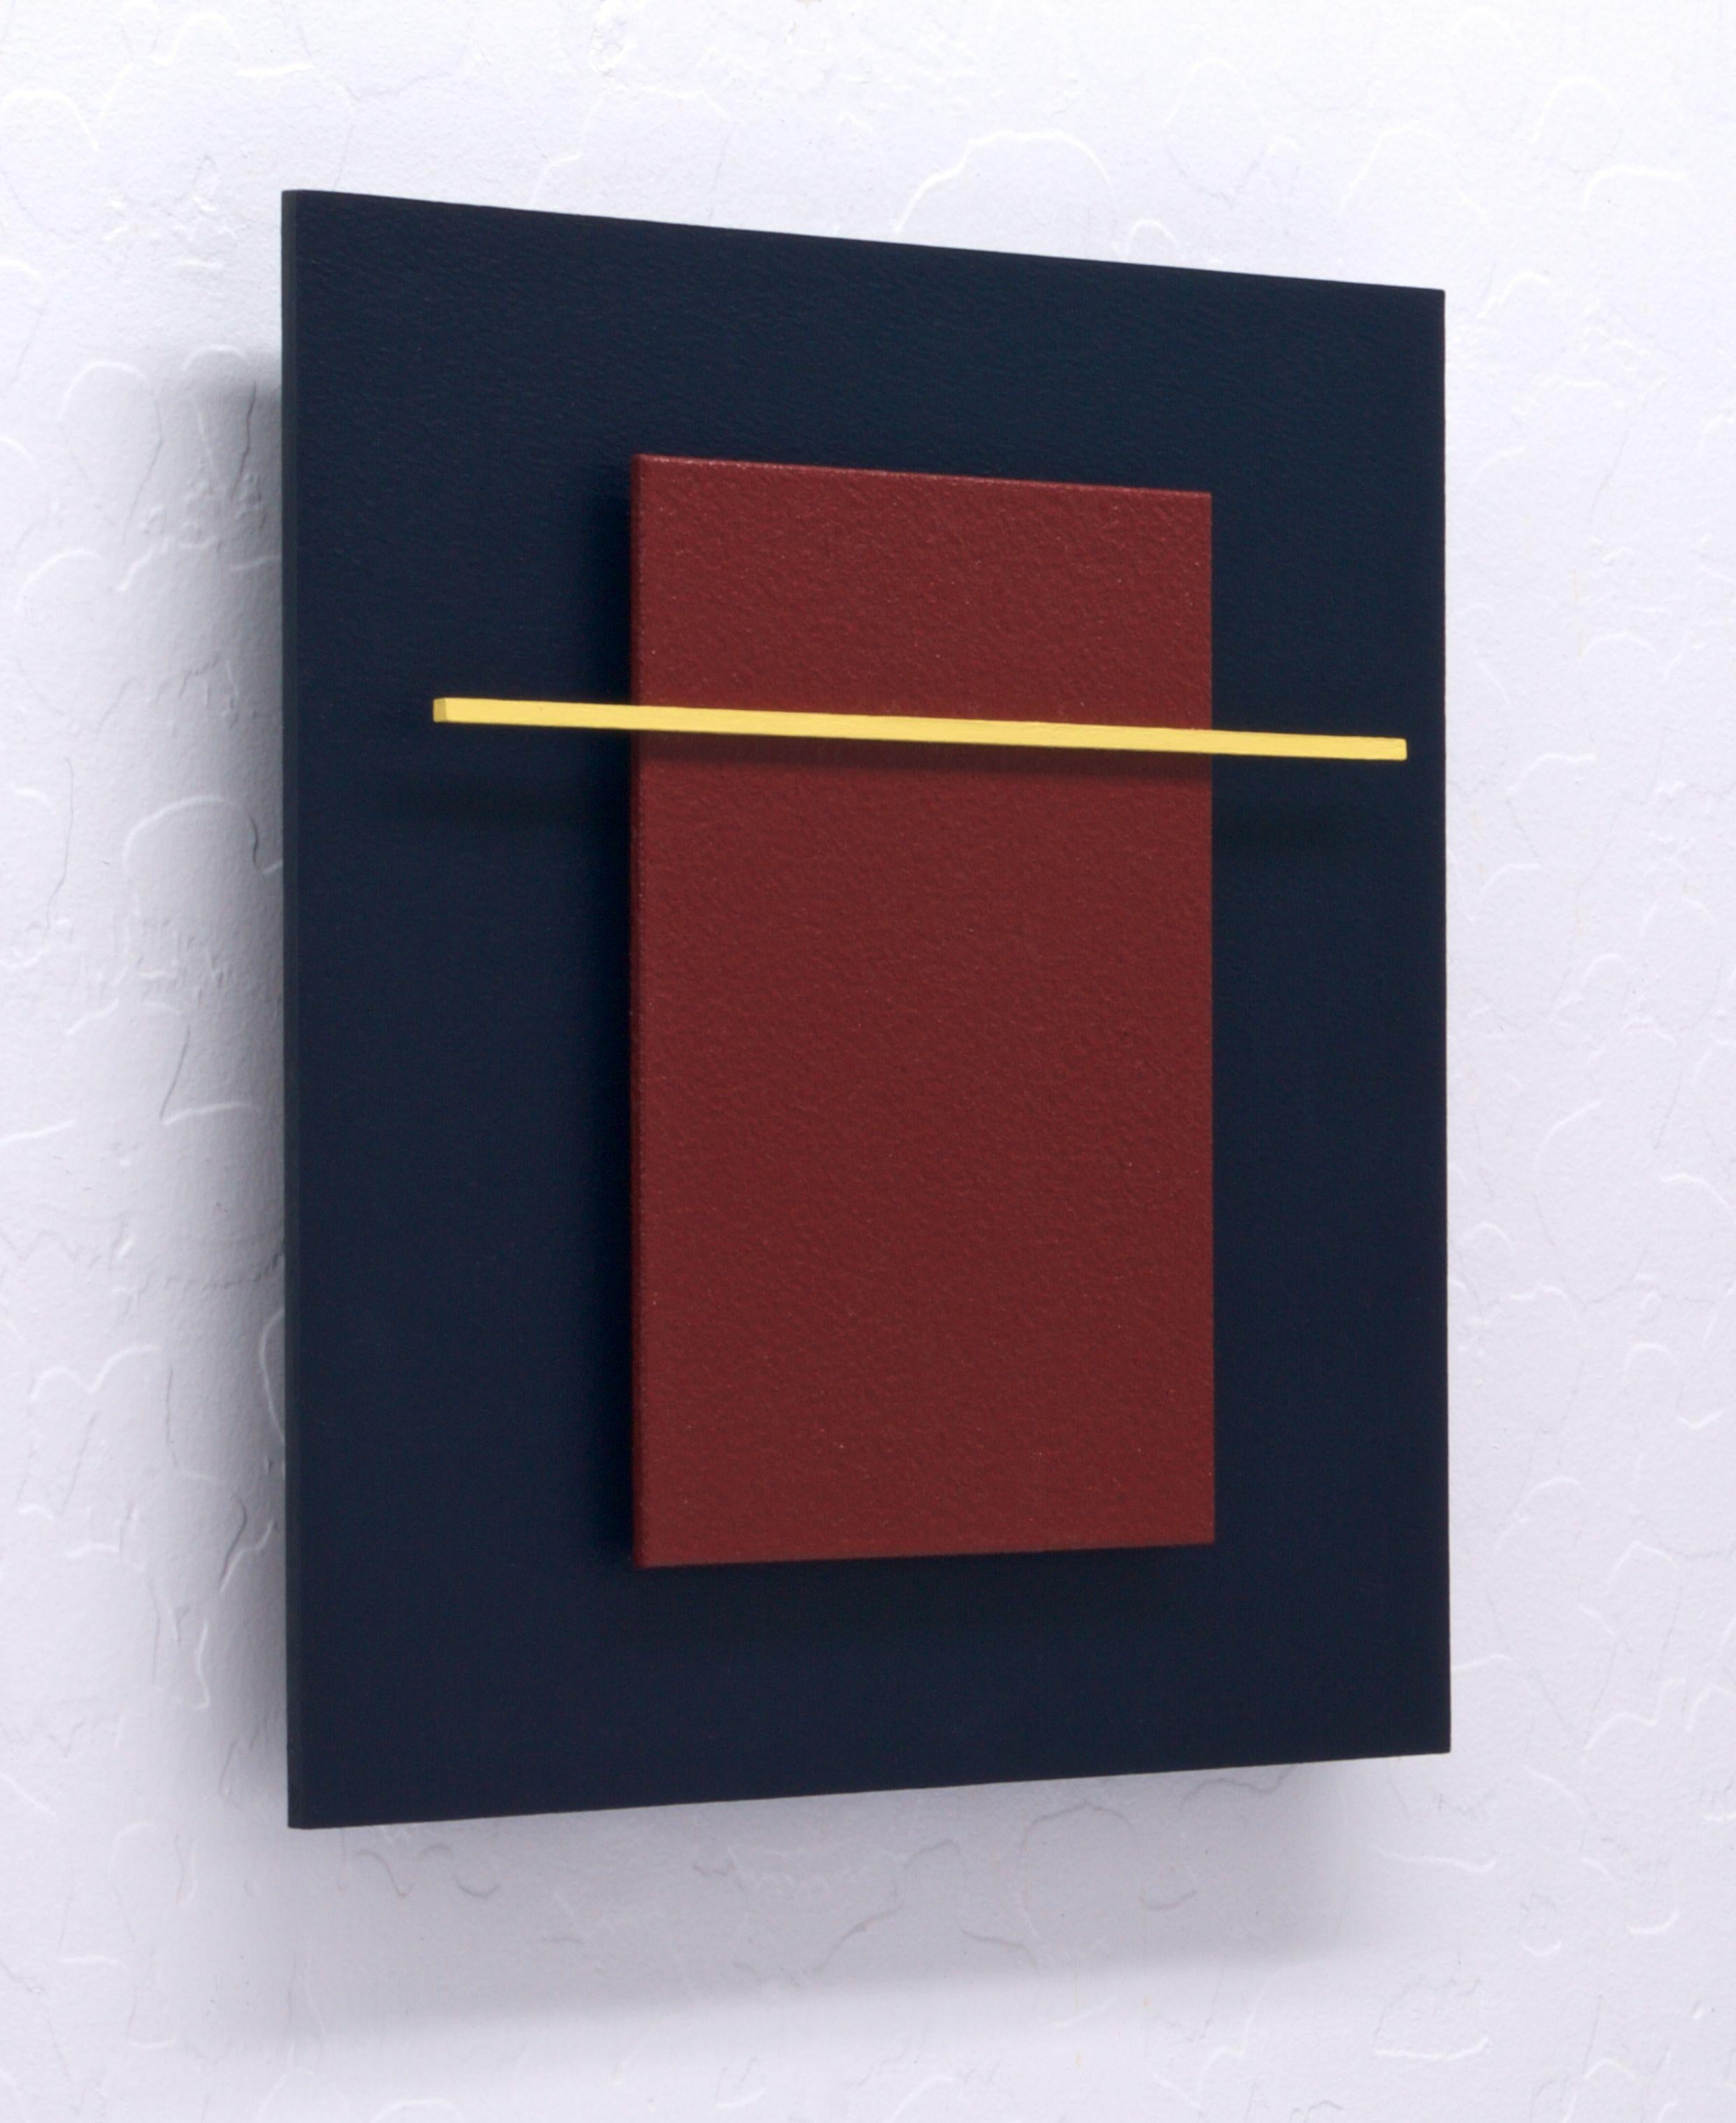 Three Dimensional Modern Painting - Collage / Construction    SERIES: 